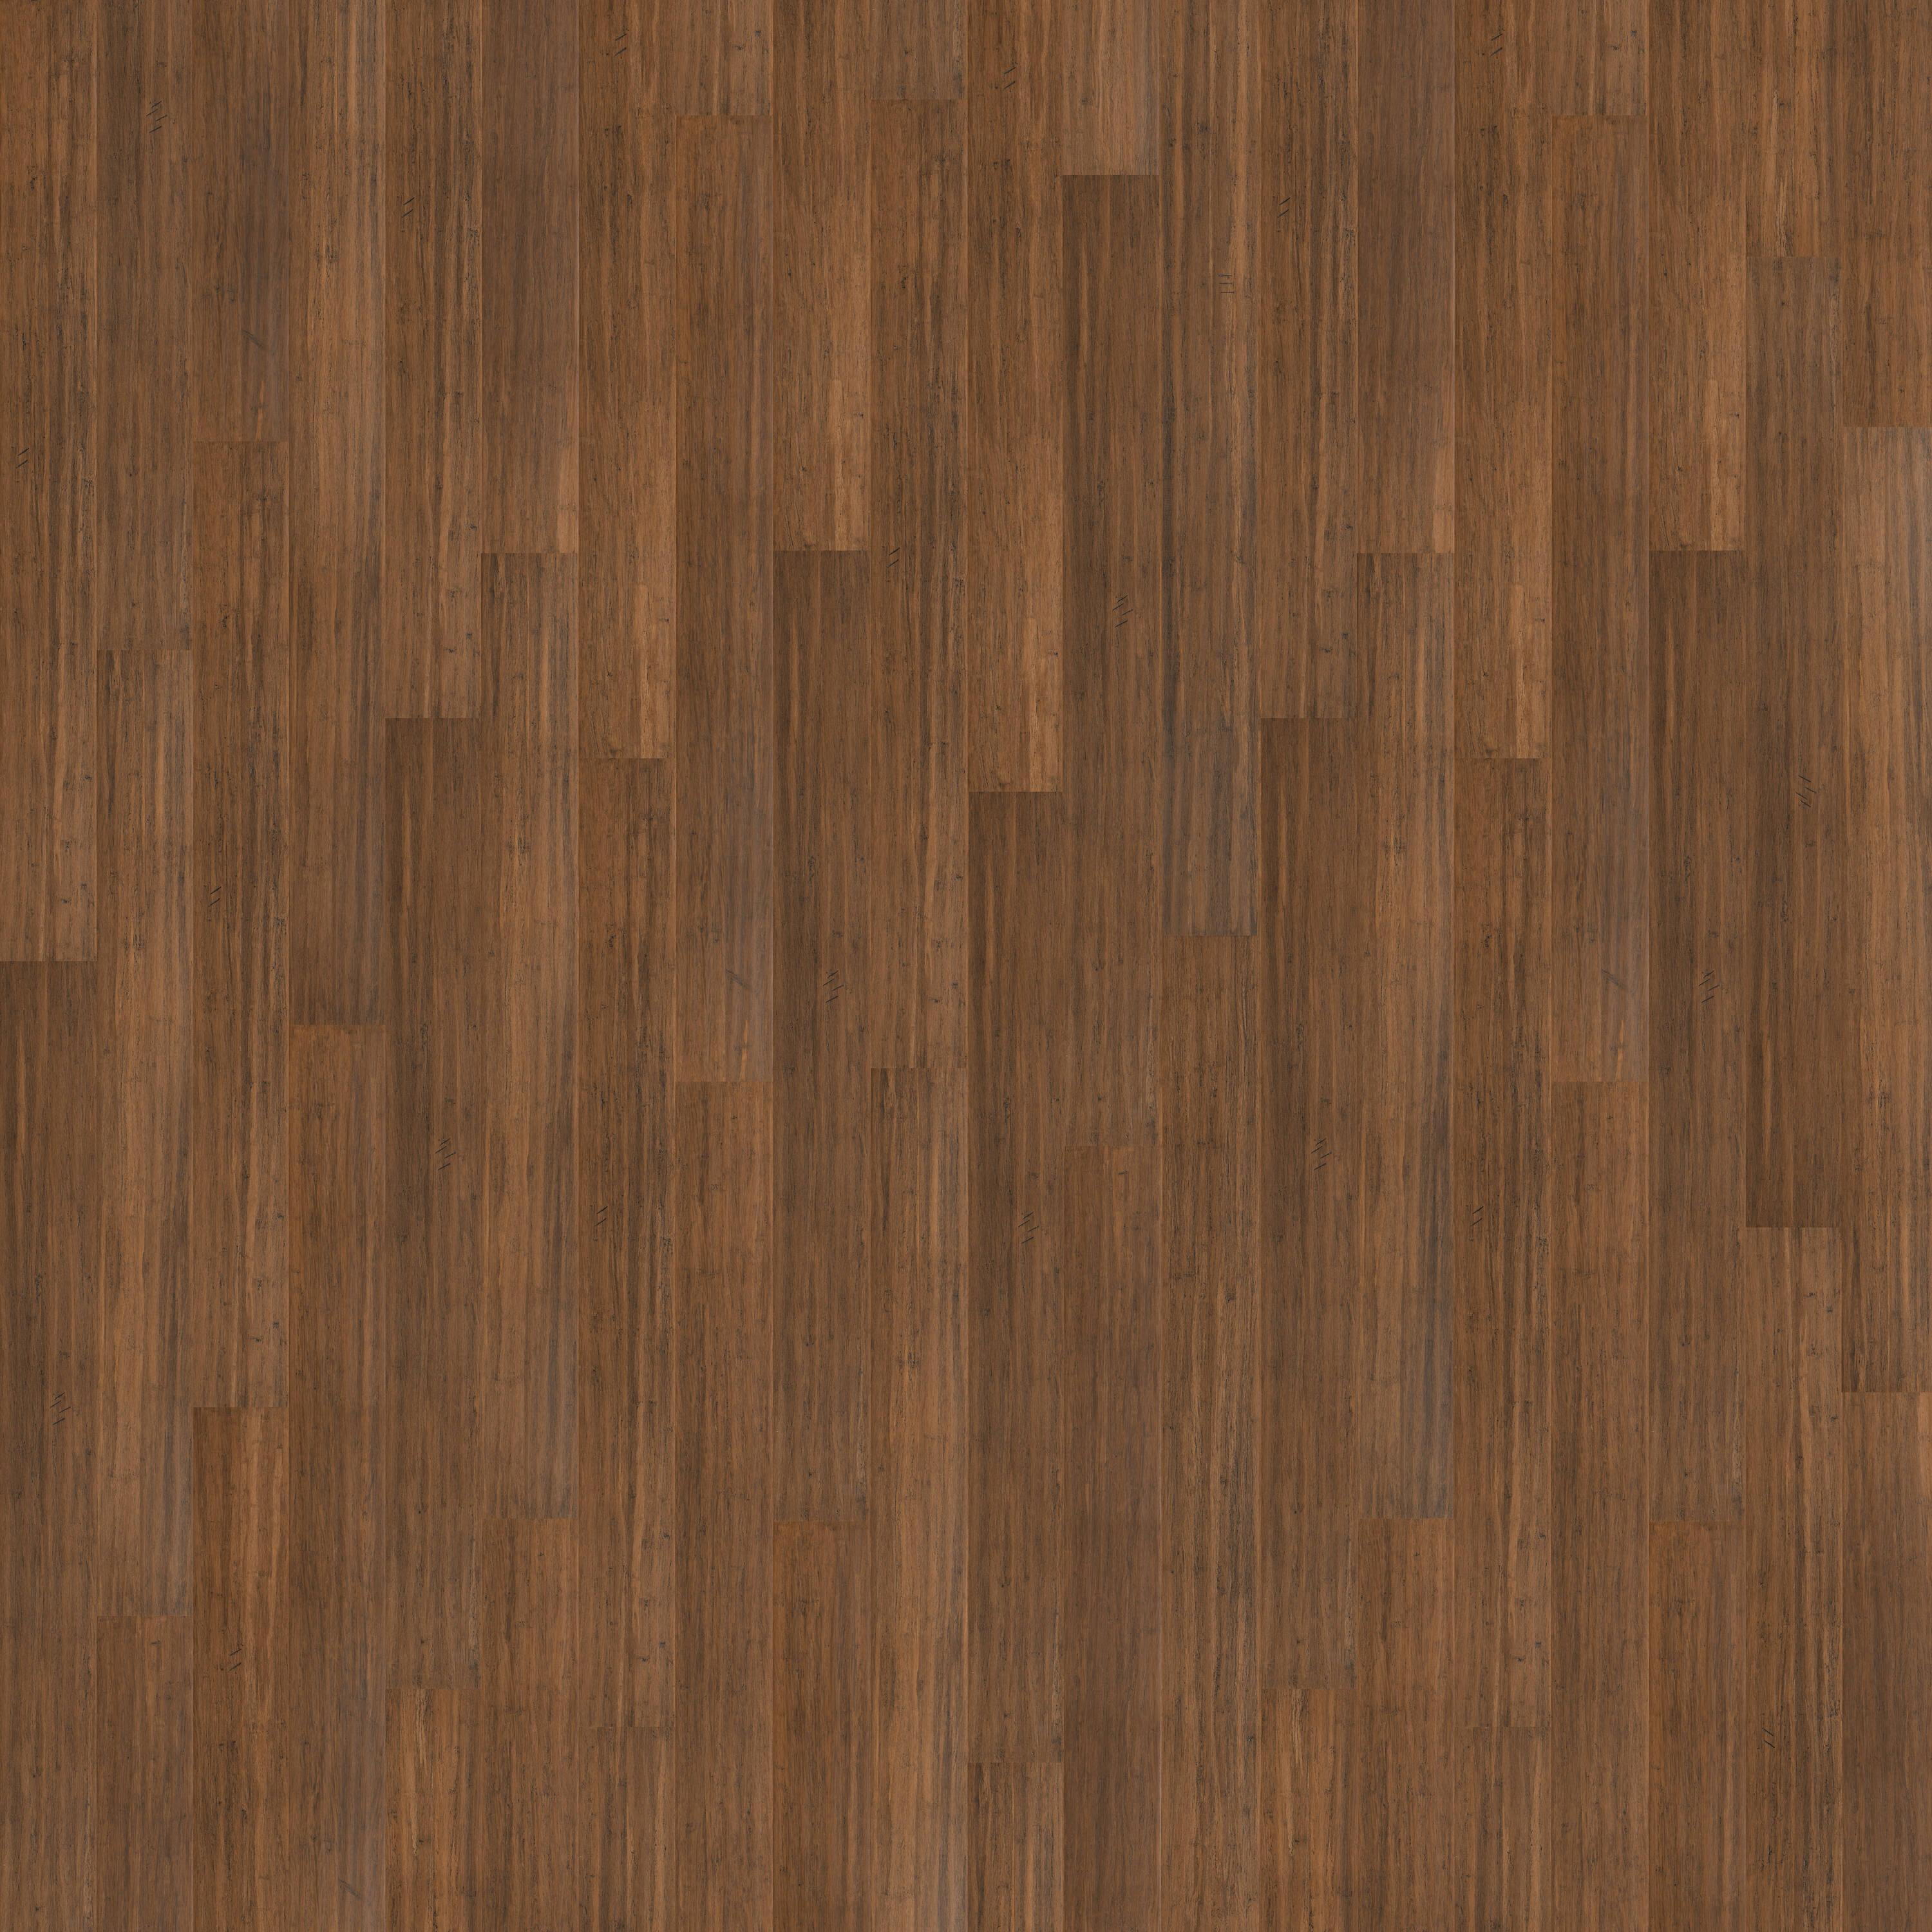 Fossilized Antique Java Bamboo 5-5/16-in W x 9/16-in T x Handscraped Engineered Hardwood Flooring (21.5-sq ft) in Brown | - CALI 7014001100